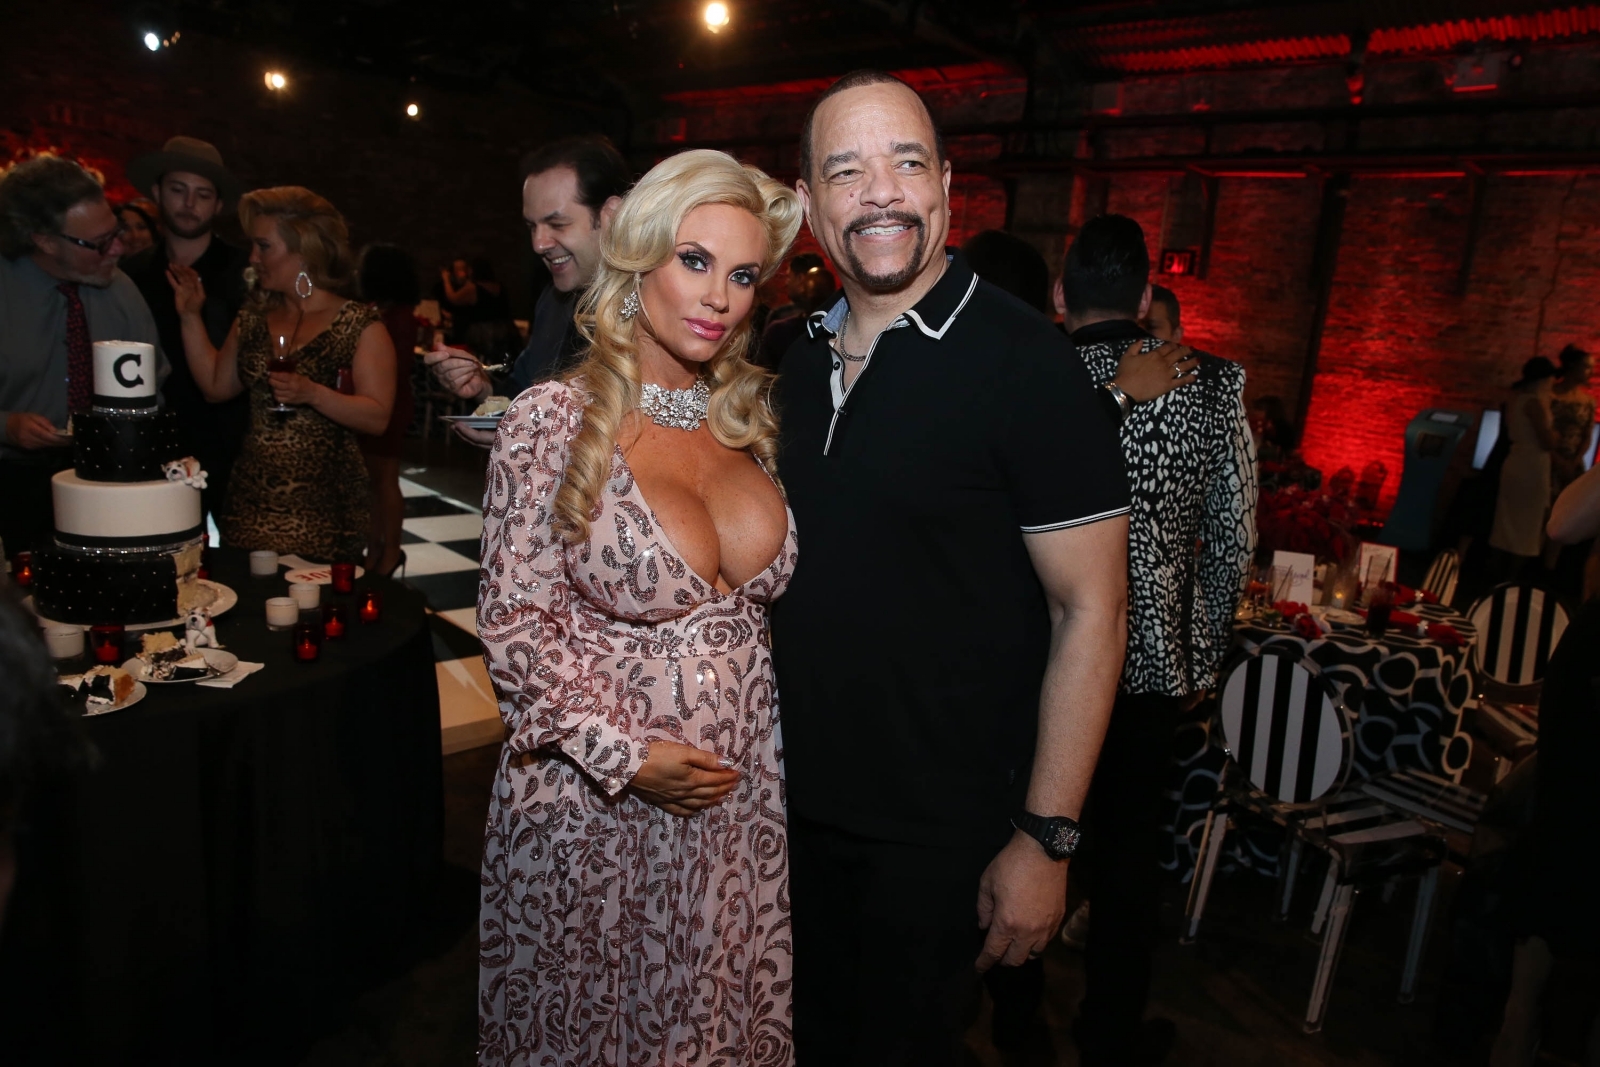 amalee chandraratna recommends Pics Of Coco Austin Before Plastic Surgery